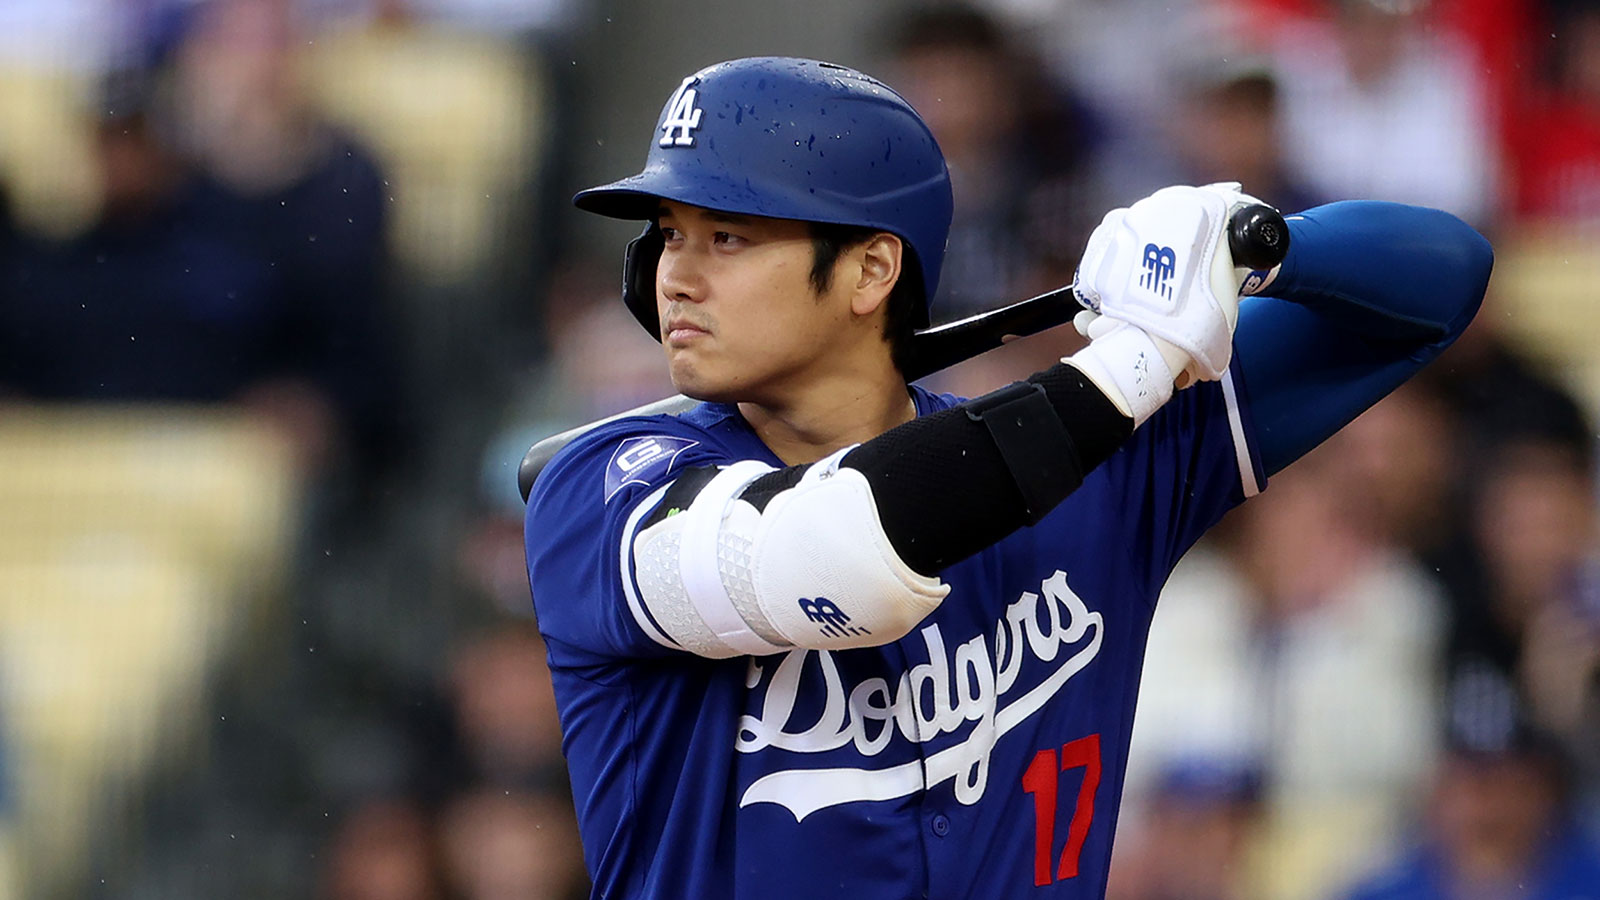 Ohtani at bat during a preseason game against the Los Angeles Angels at Dodger Stadium on Sunday, March 24, in Los Angeles.